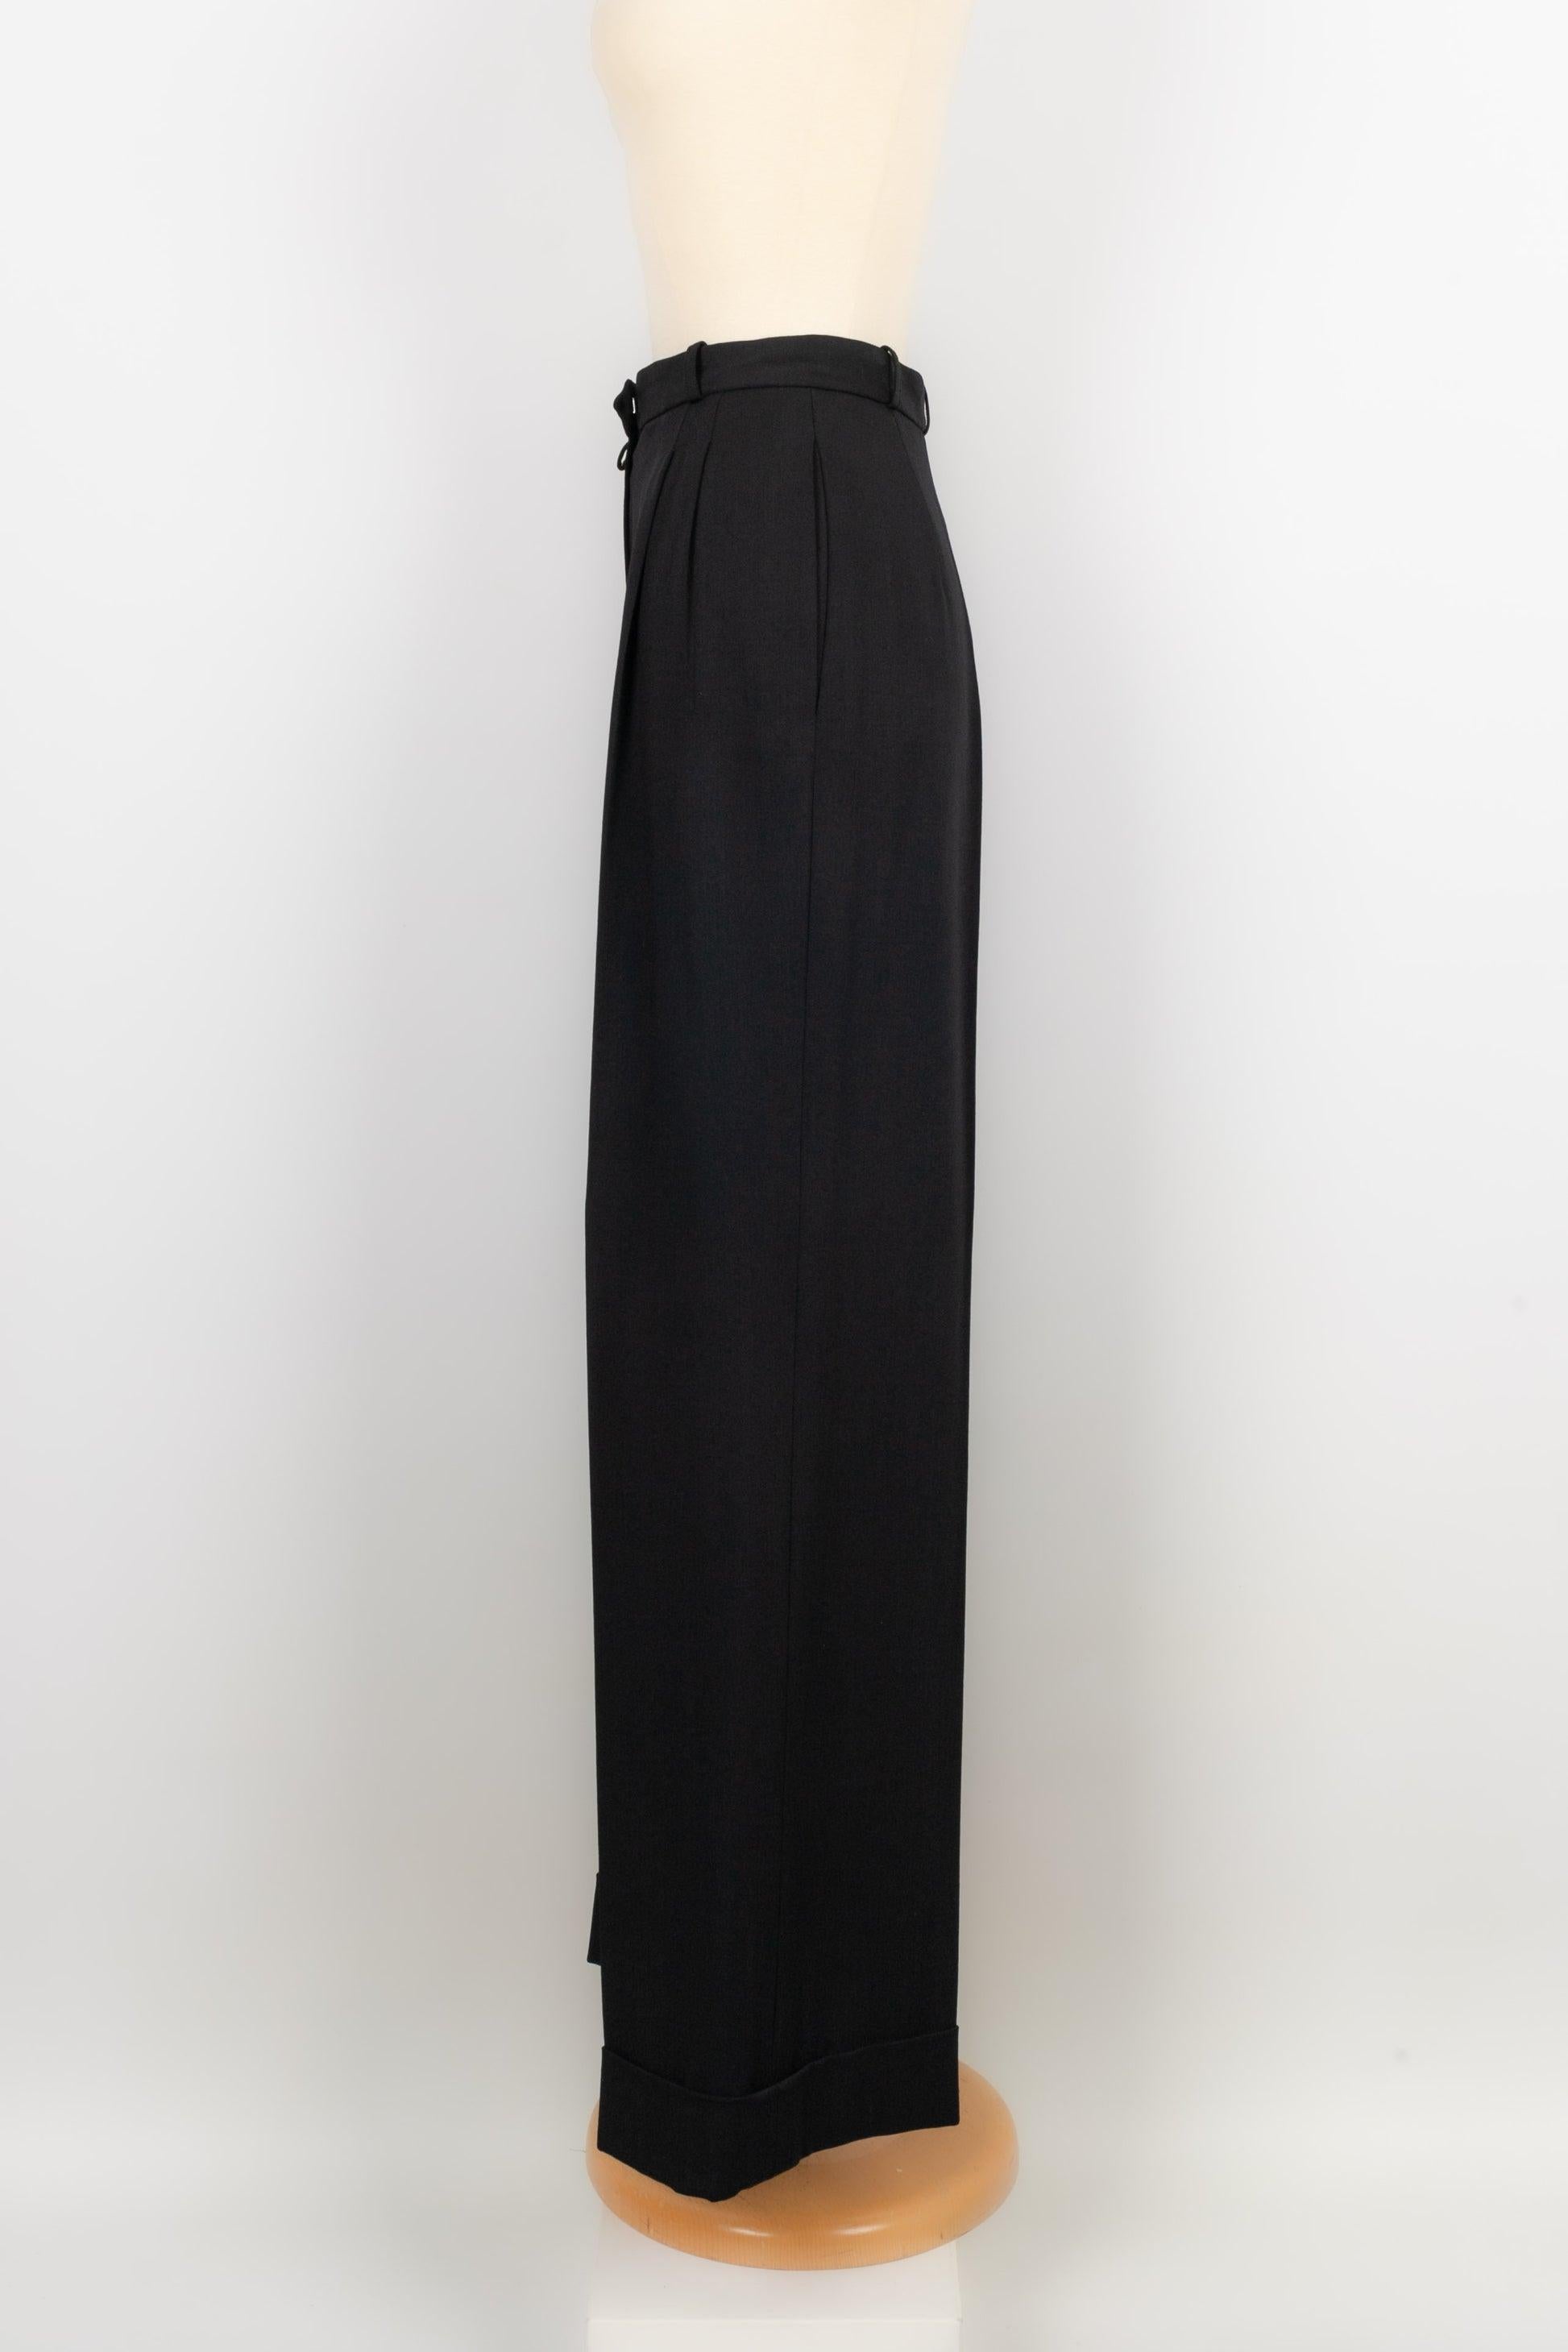 Dior - (Made in France) Black blended wool pants. Indicated size 36FR.

Additional information:
Condition: Very good condition
Dimensions: Waist: 30 cm - Hips: 49 cm - Length: 105 cm

Seller Reference: FJ79